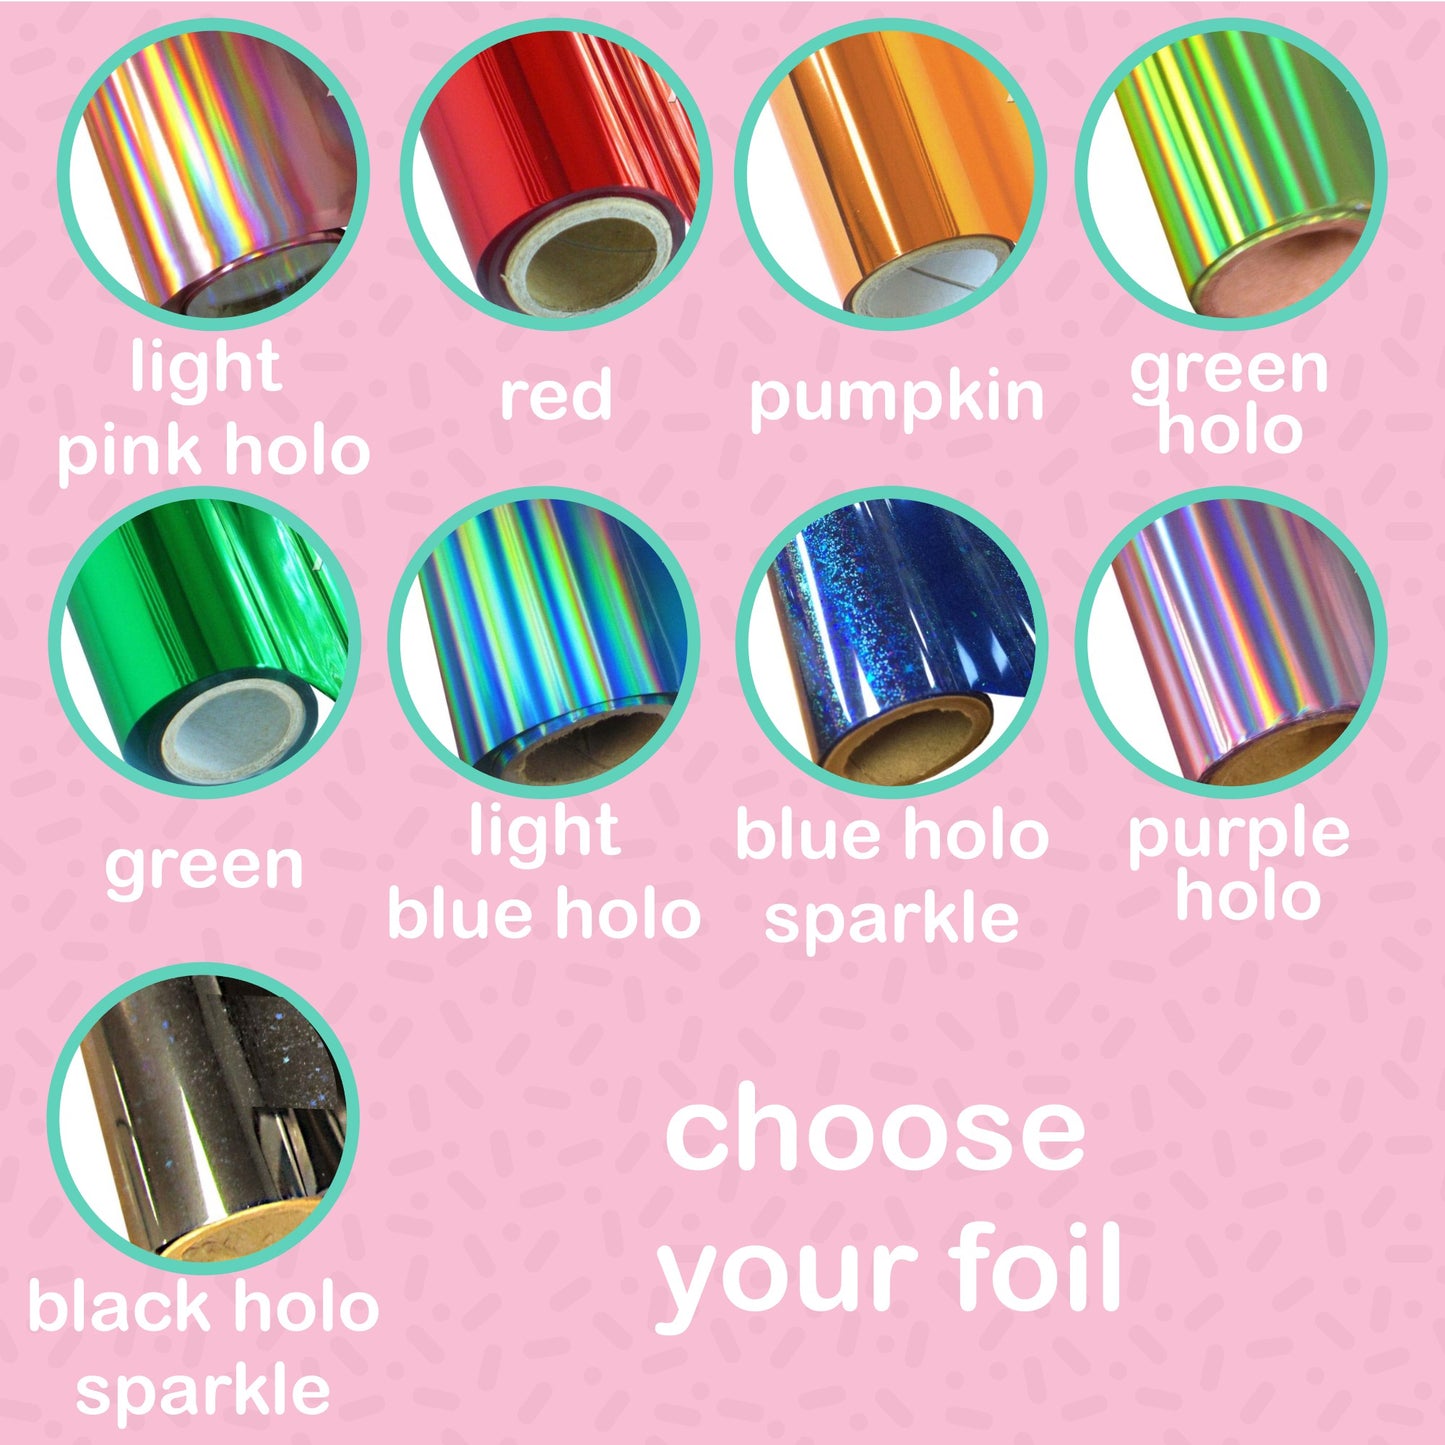 Seaweed & Shells Foil Stickers - choose your foil - F176